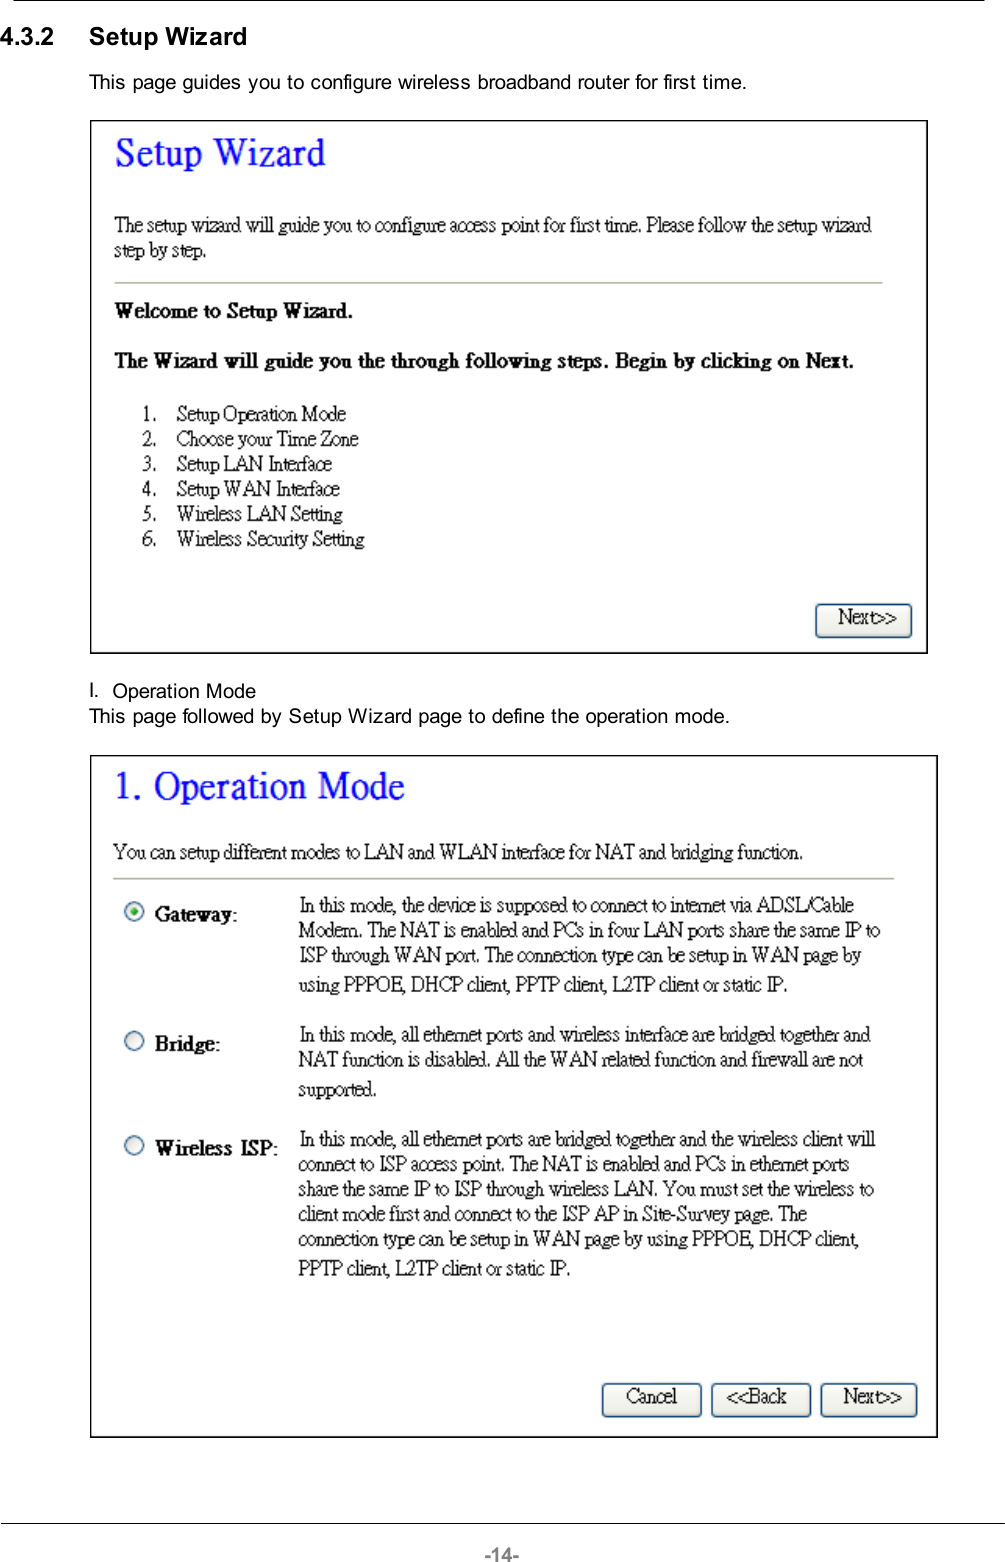 -14-4.3.2 Setup WizardThis page guides you to configure wireless broadband router for first time.I. Operation ModeThis page followed by Setup Wizard page to define the operation mode.